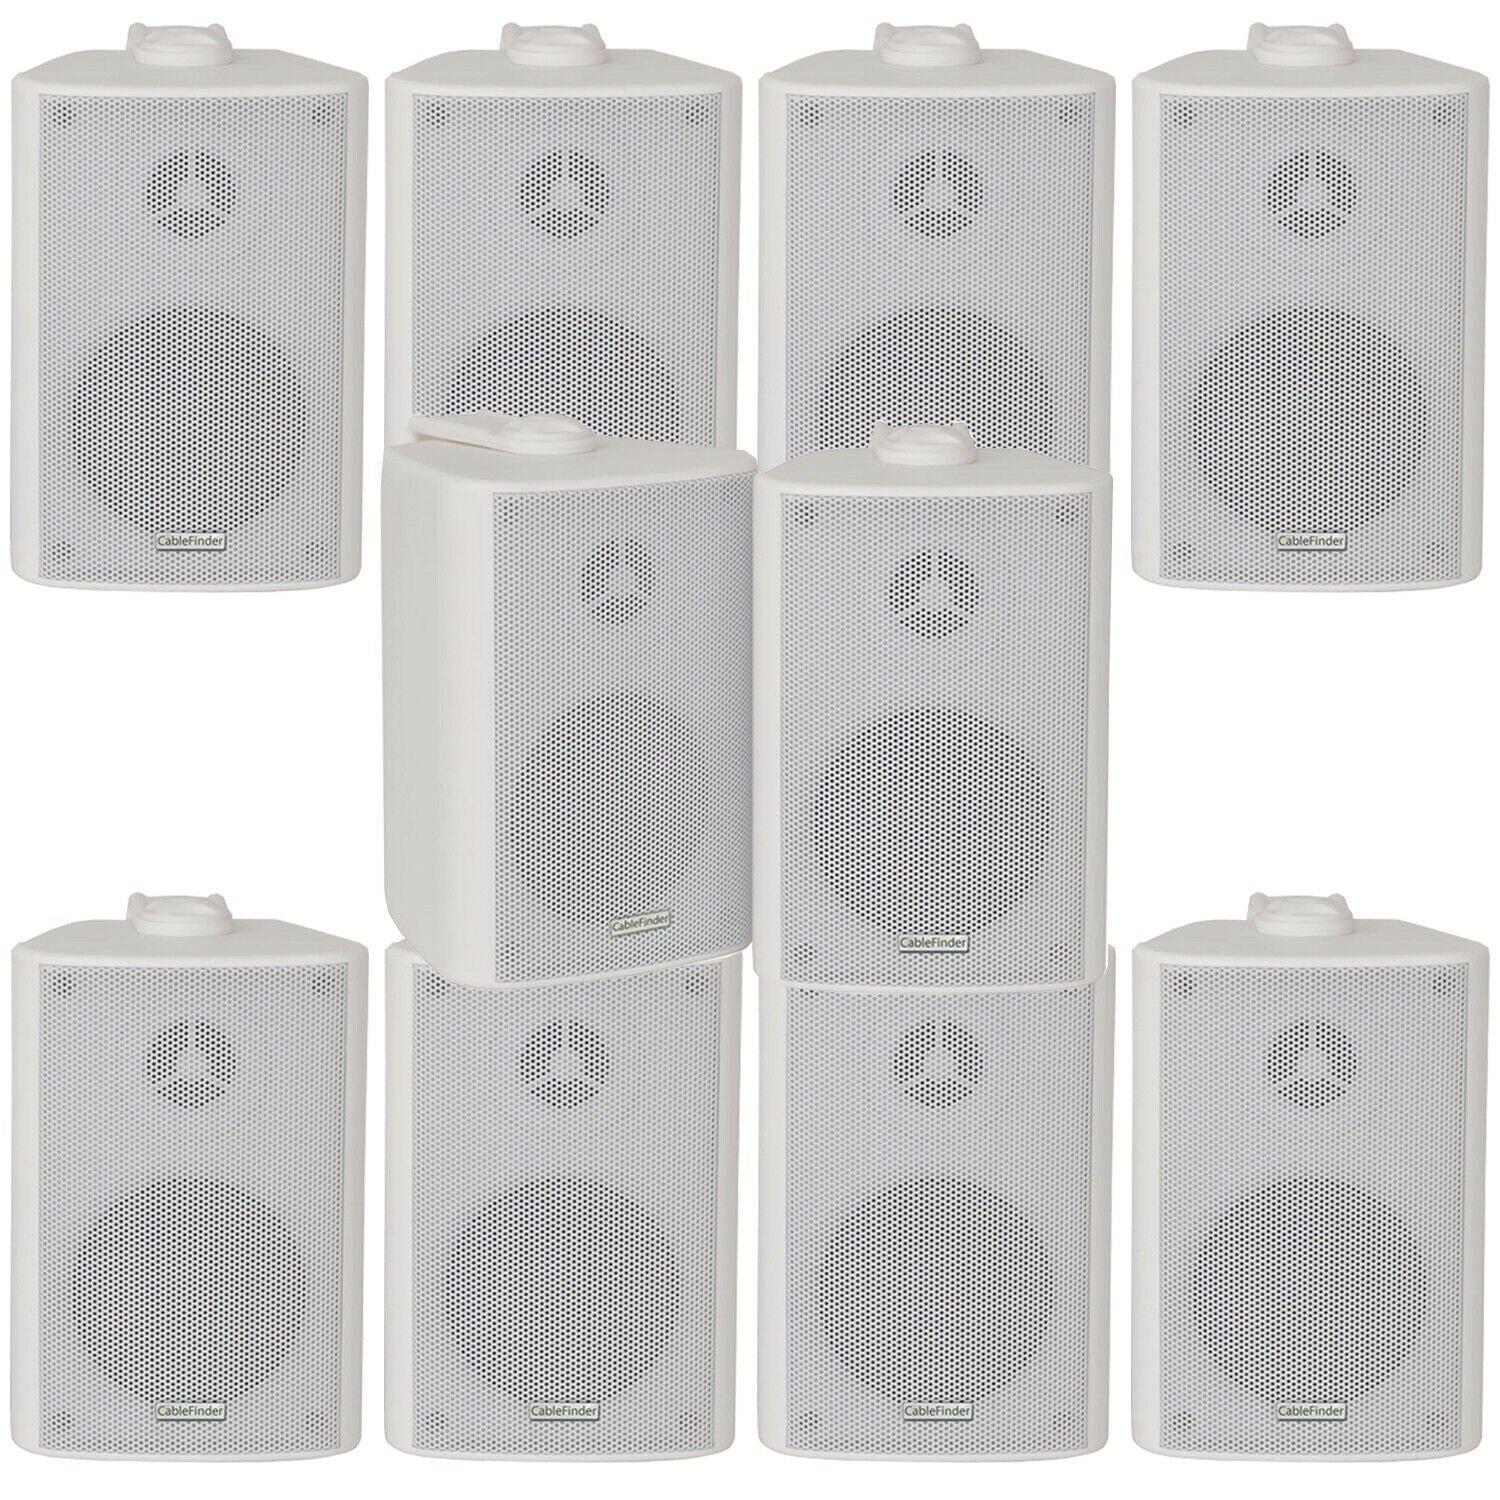 10x 120W White Wall Mounted Stereo Speakers 6.5